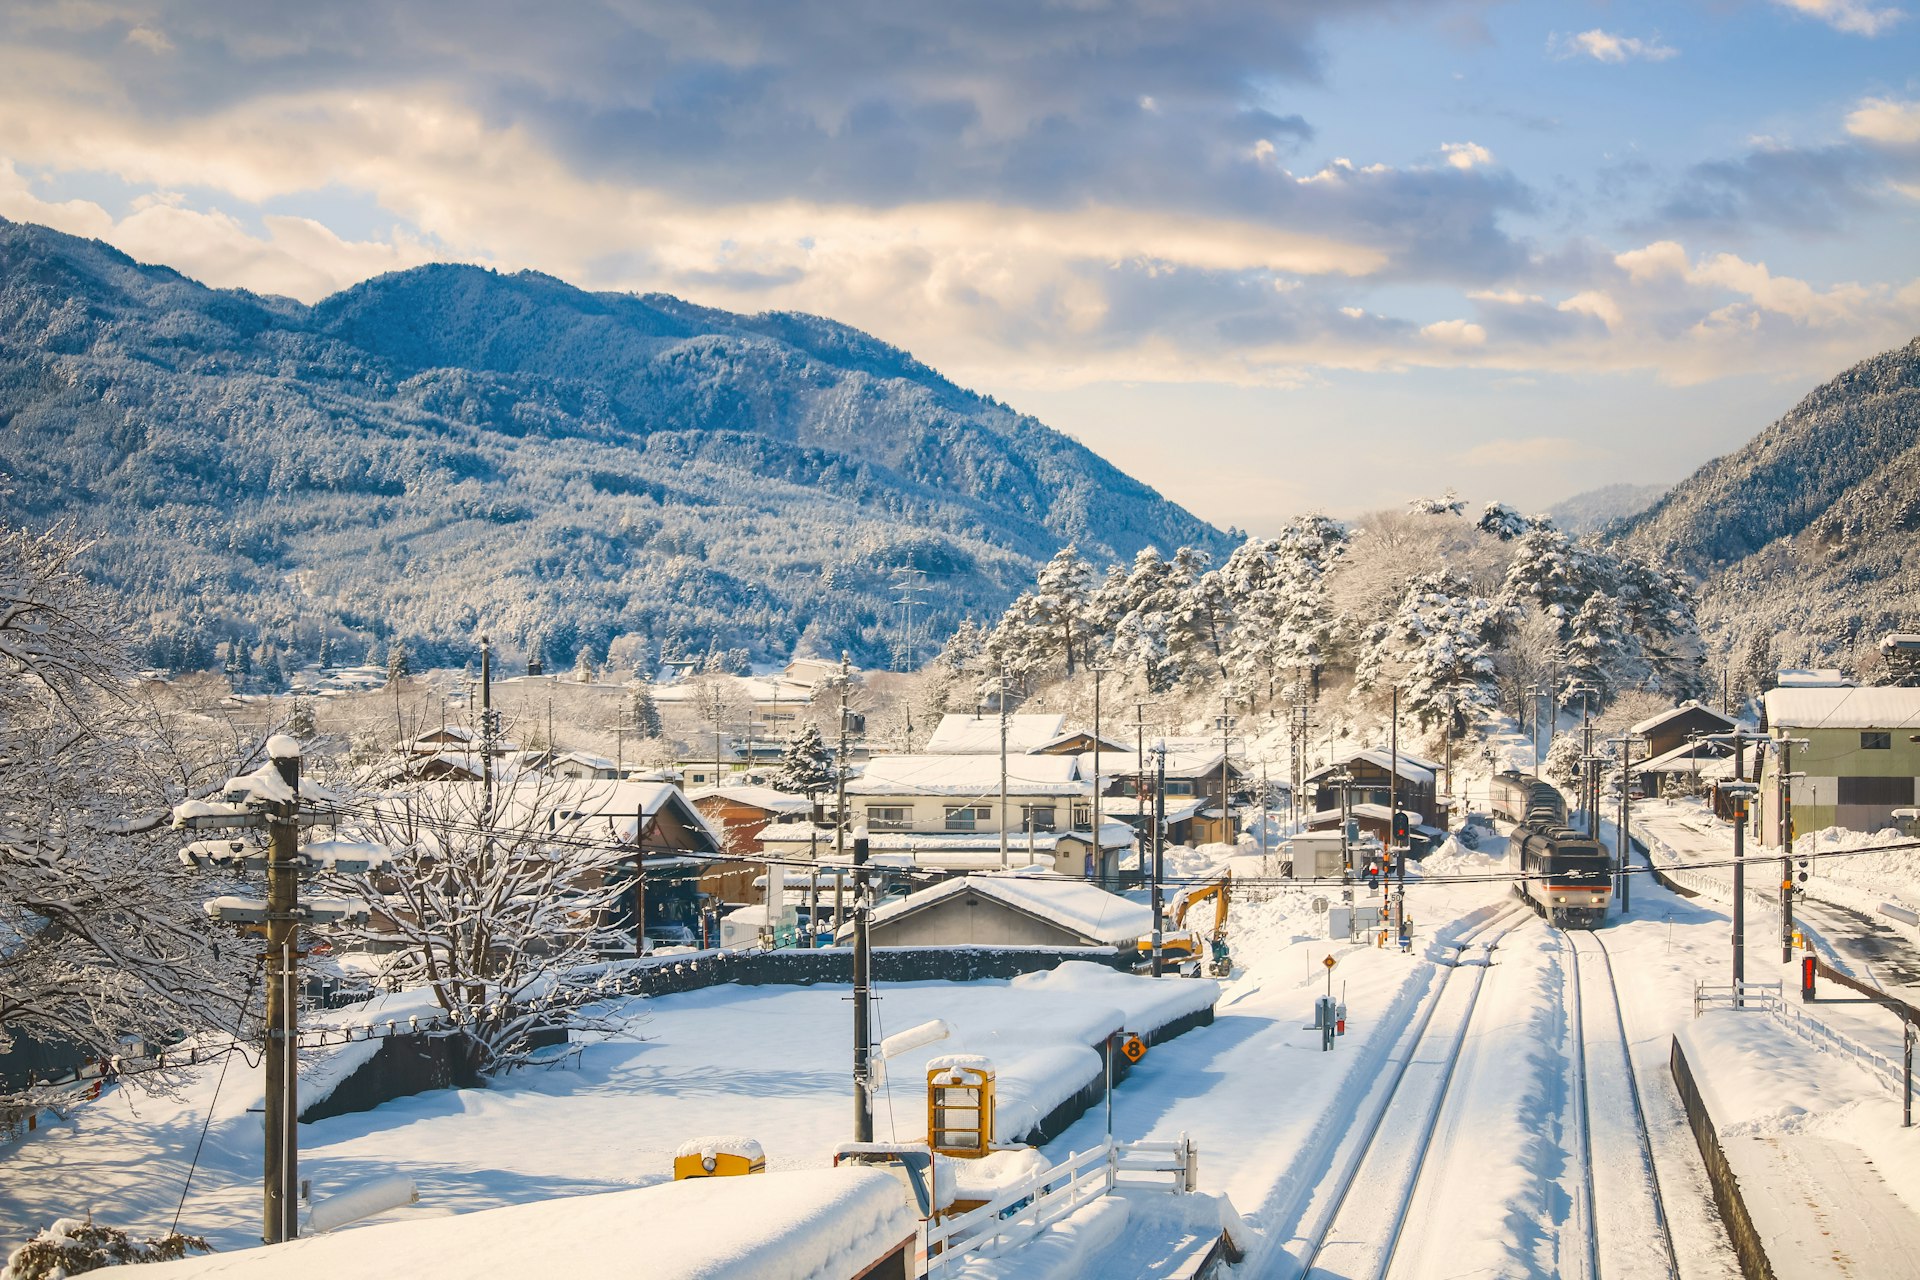 A trains station in winter with snow, Takayama, Japan